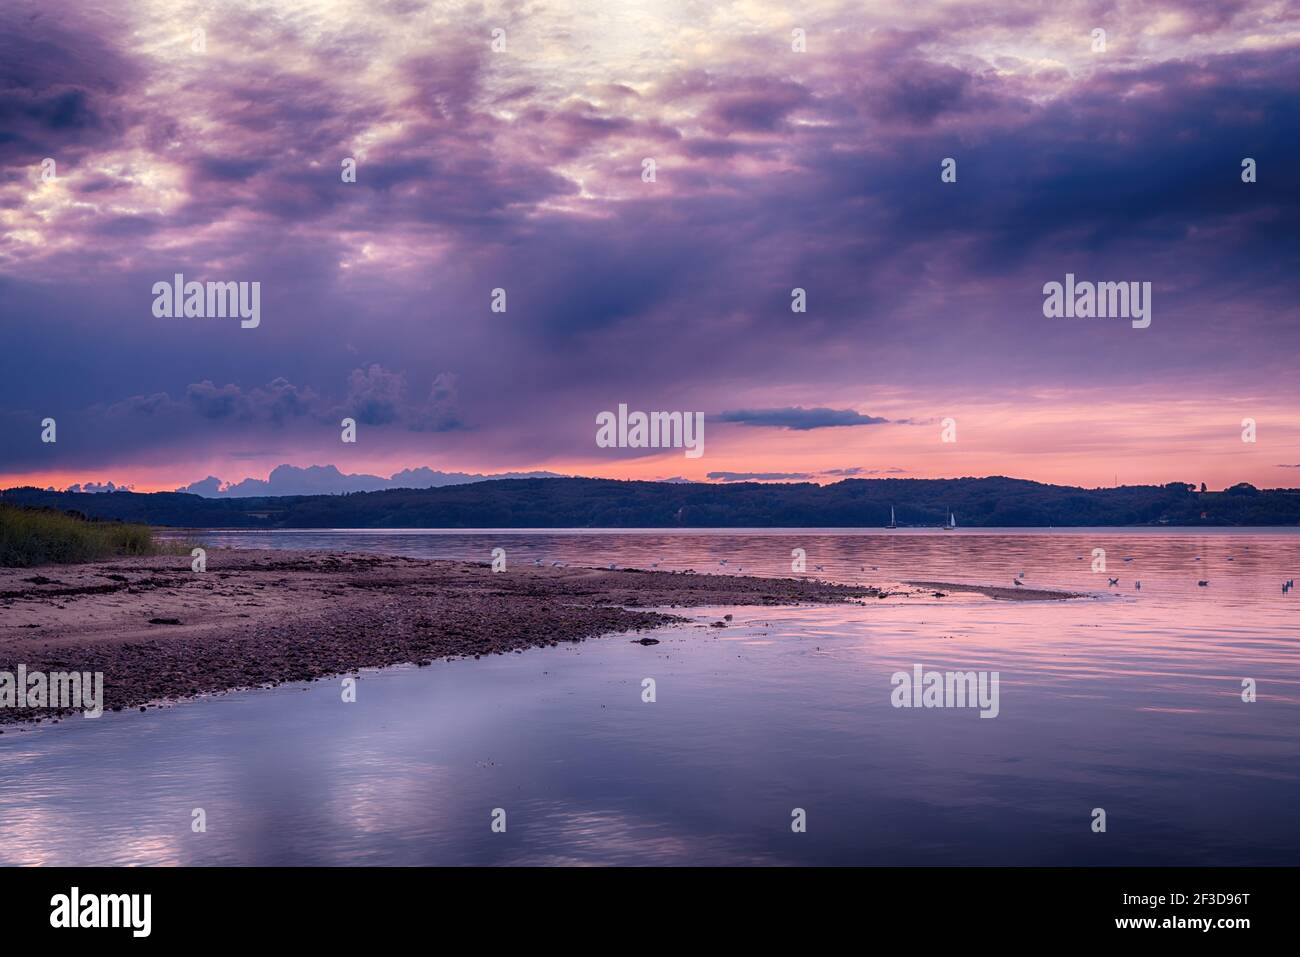 Purple sunset over Vejle Fjord in Denmark. Calm surface waters, surrounded by low forested hills. Beautiful landscape of the Jutland Peninsula. Stock Photo